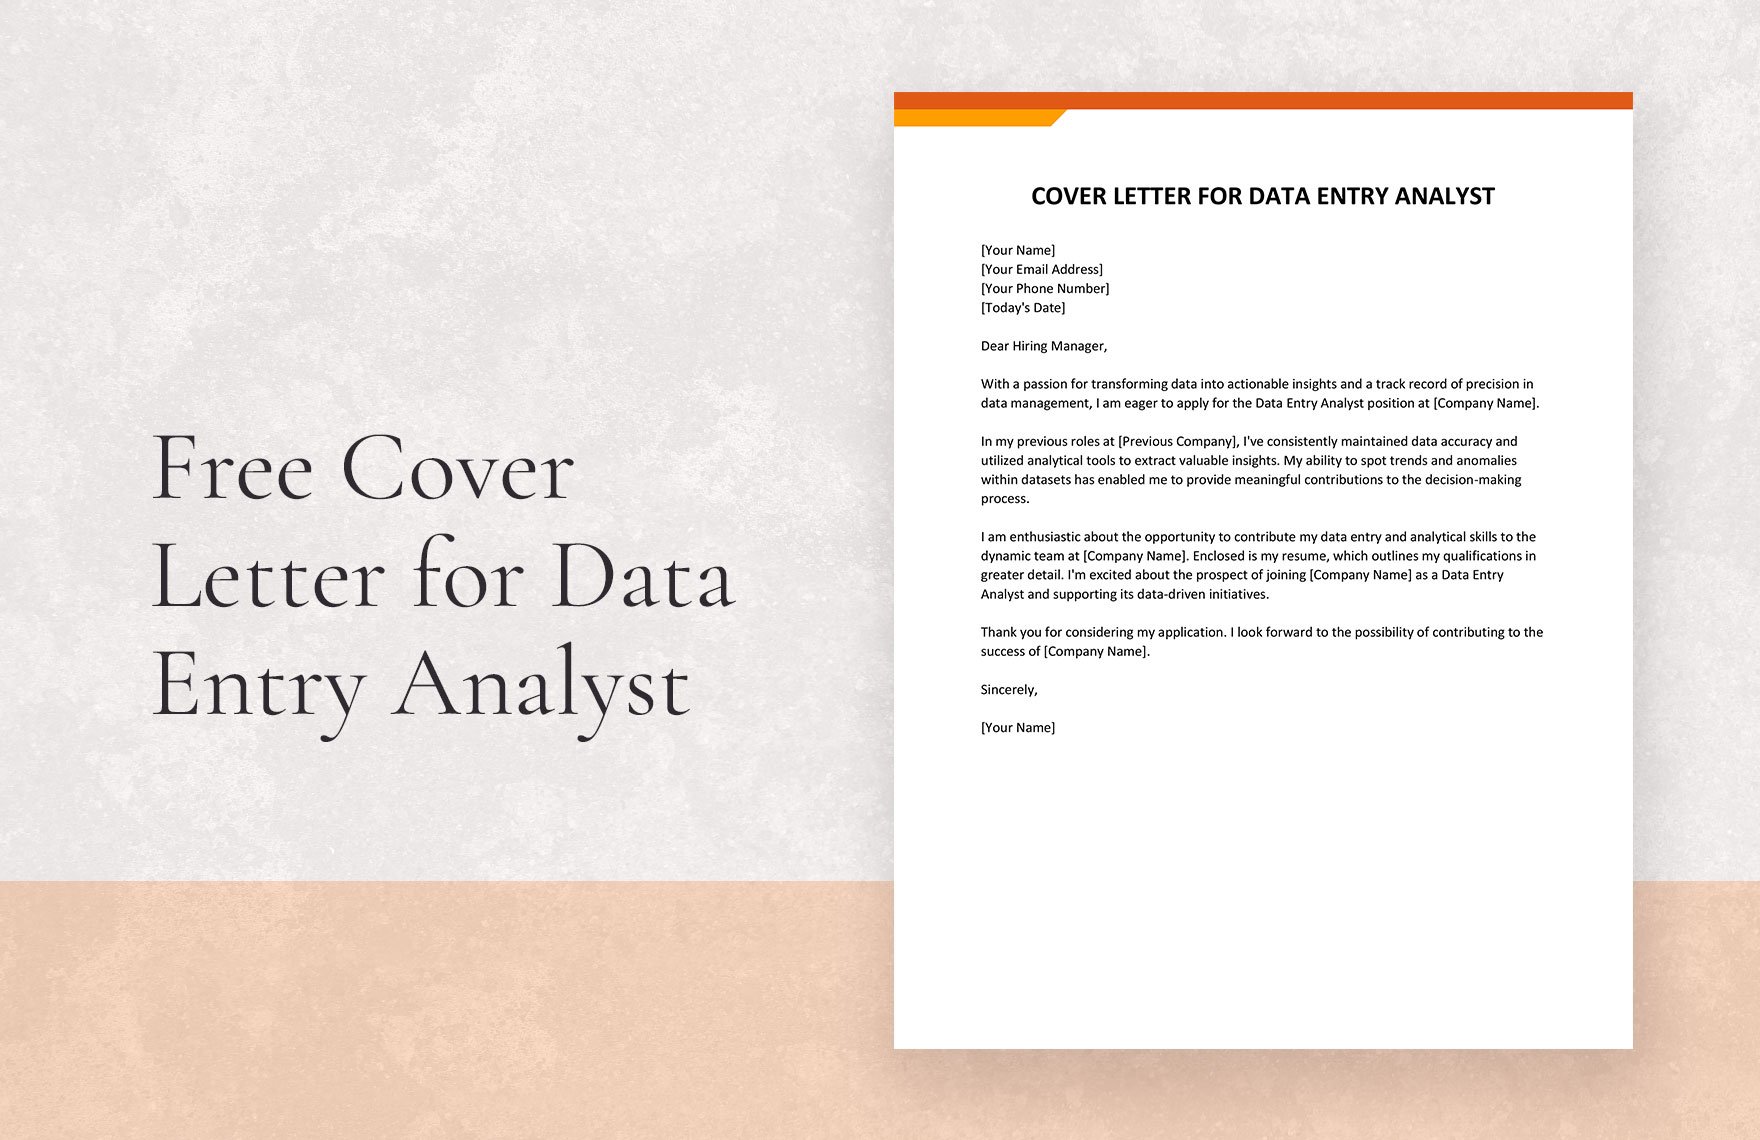 Cover Letter for Data Entry Analyst